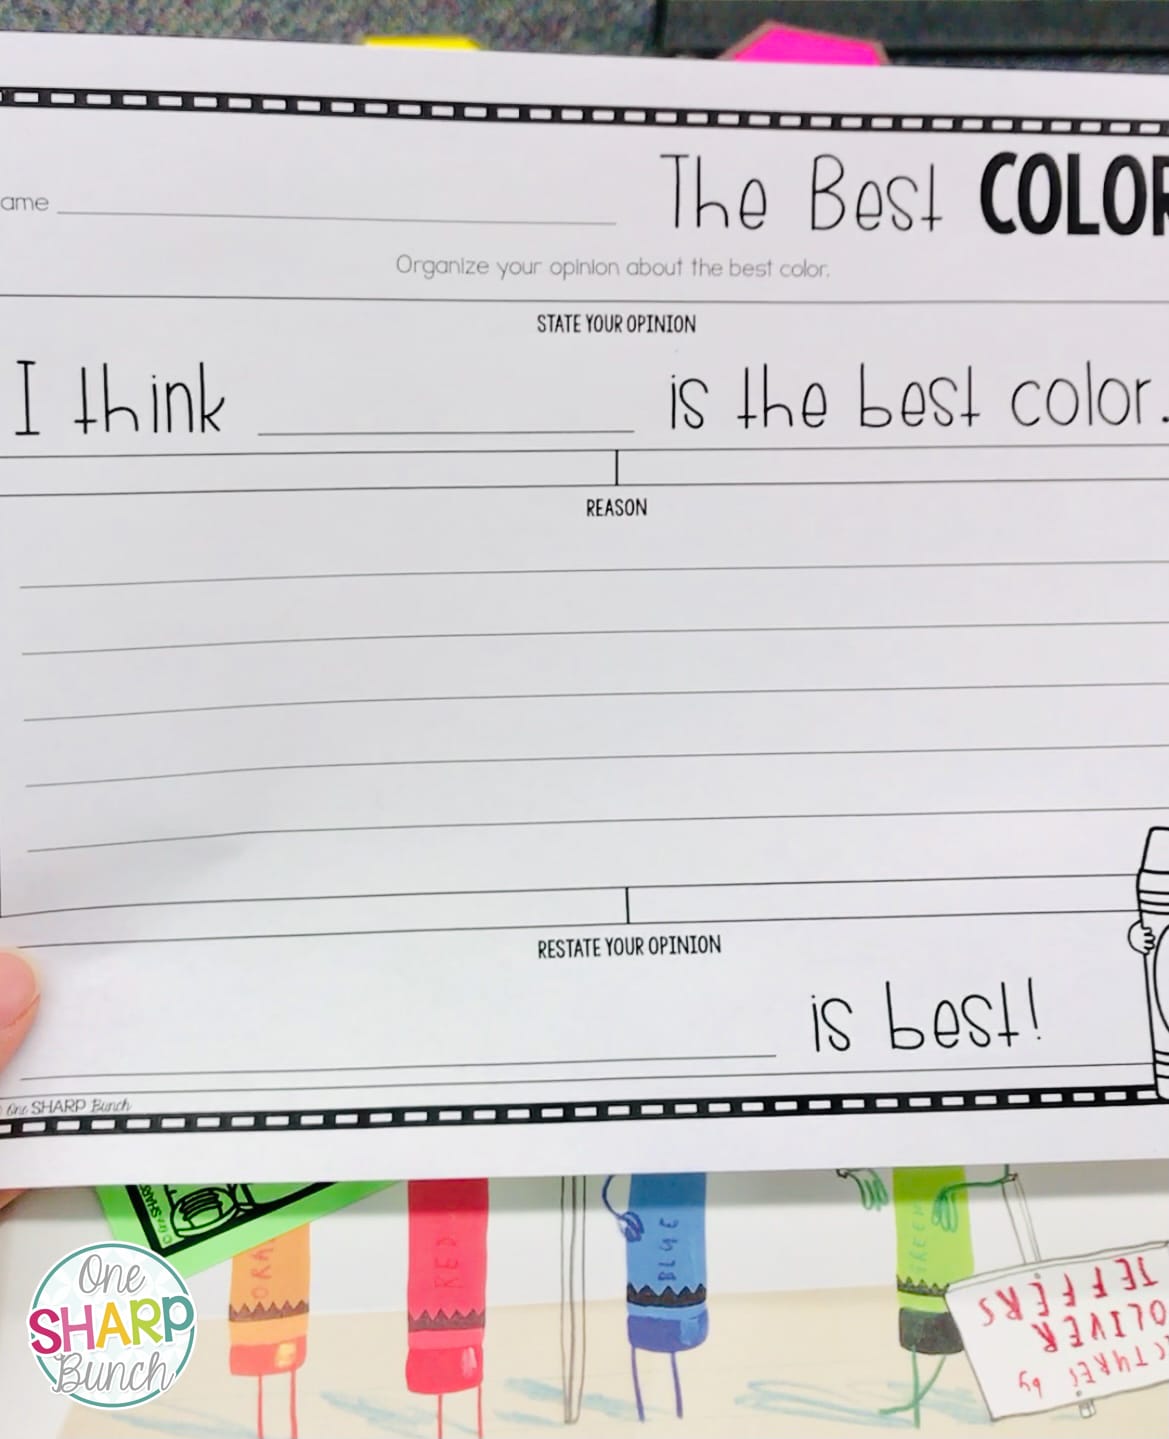 Launch your opinion writing unit with these 10 daily opinion writing lesson plans, including opinion writing anchor chart, opinion writing graphic organizers, opinion writing prompts and The Day the Crayons Quit opinion writing craft! Create a The Day the Crayons Quit bulletin board display with the adorable crayon craft! These The Day the Crayons Quit activities are perfect for introducing opinion writing in kindergarten, first grade and second grade!